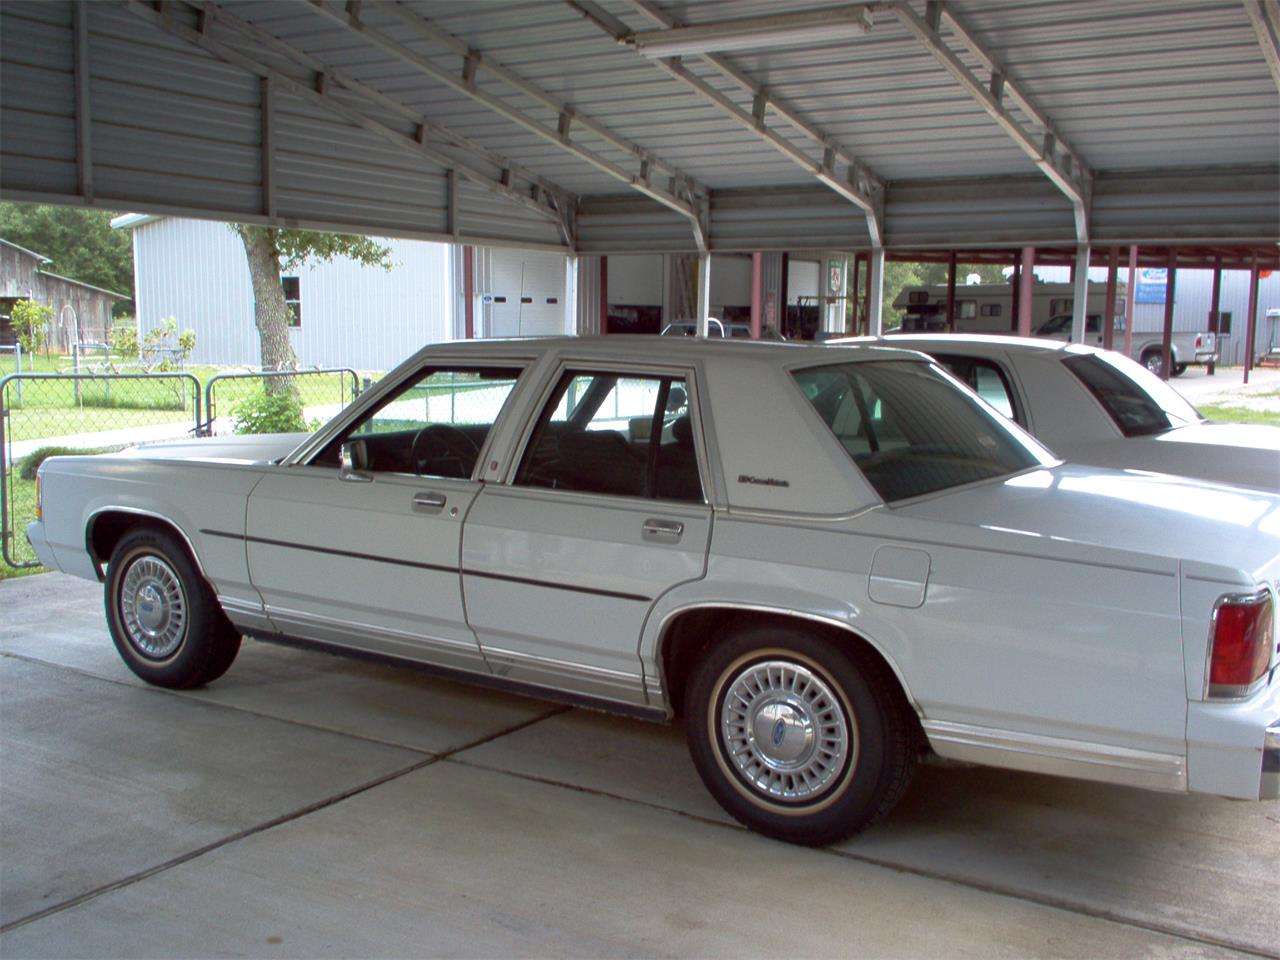 1989 ford crown victoria for sale classiccars com cc 914190 1989 ford crown victoria for sale